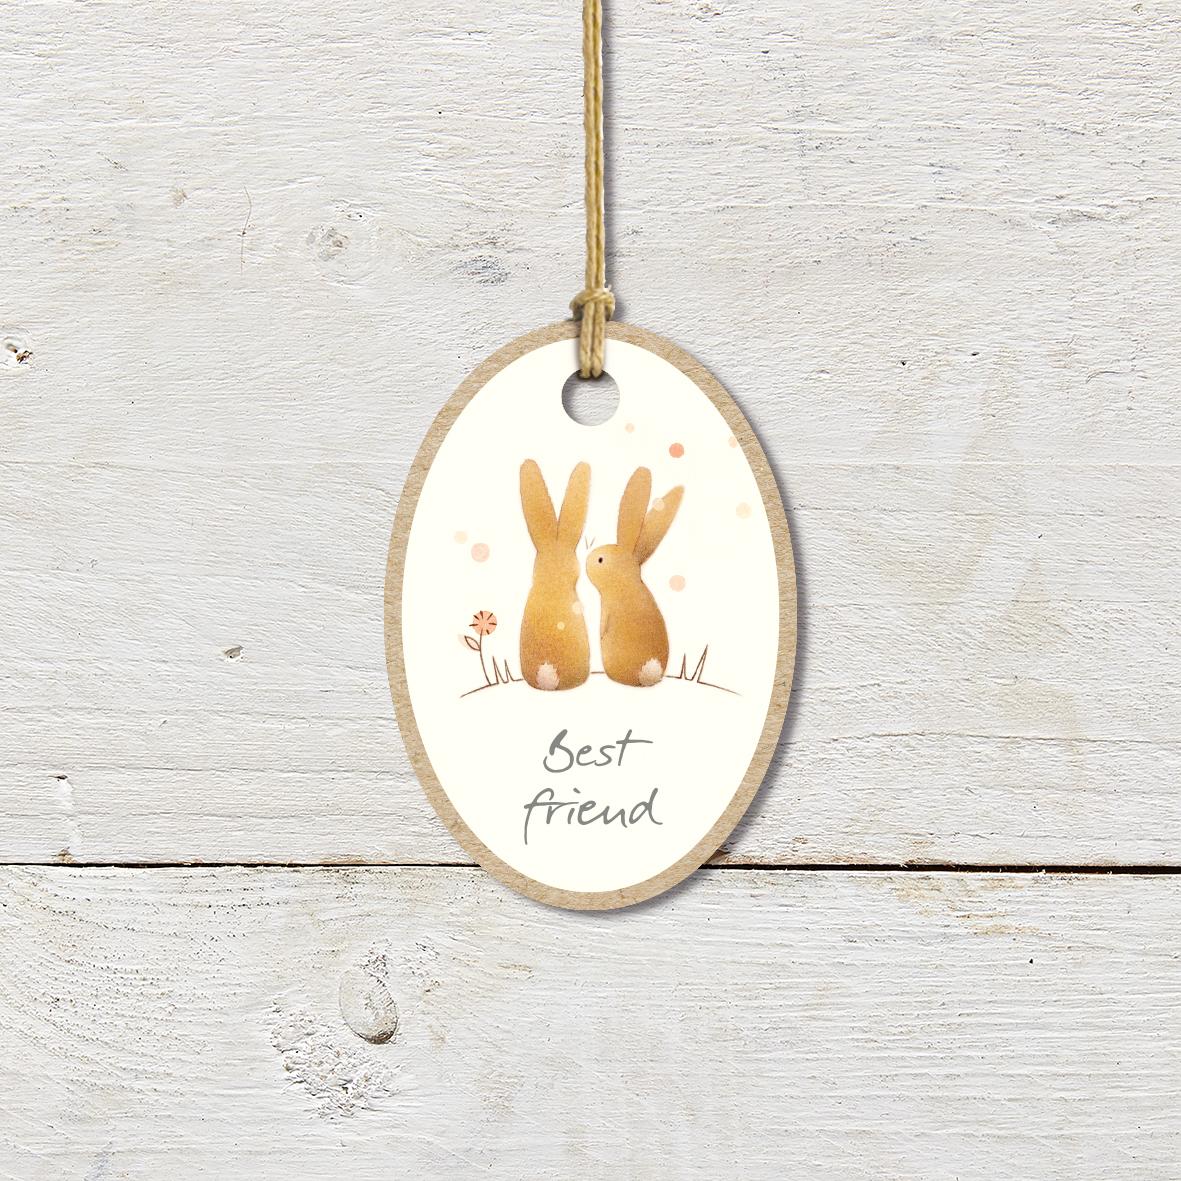 Small Wooden Keepsake Plaque/Tag featuring two cute rabbits with a ’Best Friend’ caption.